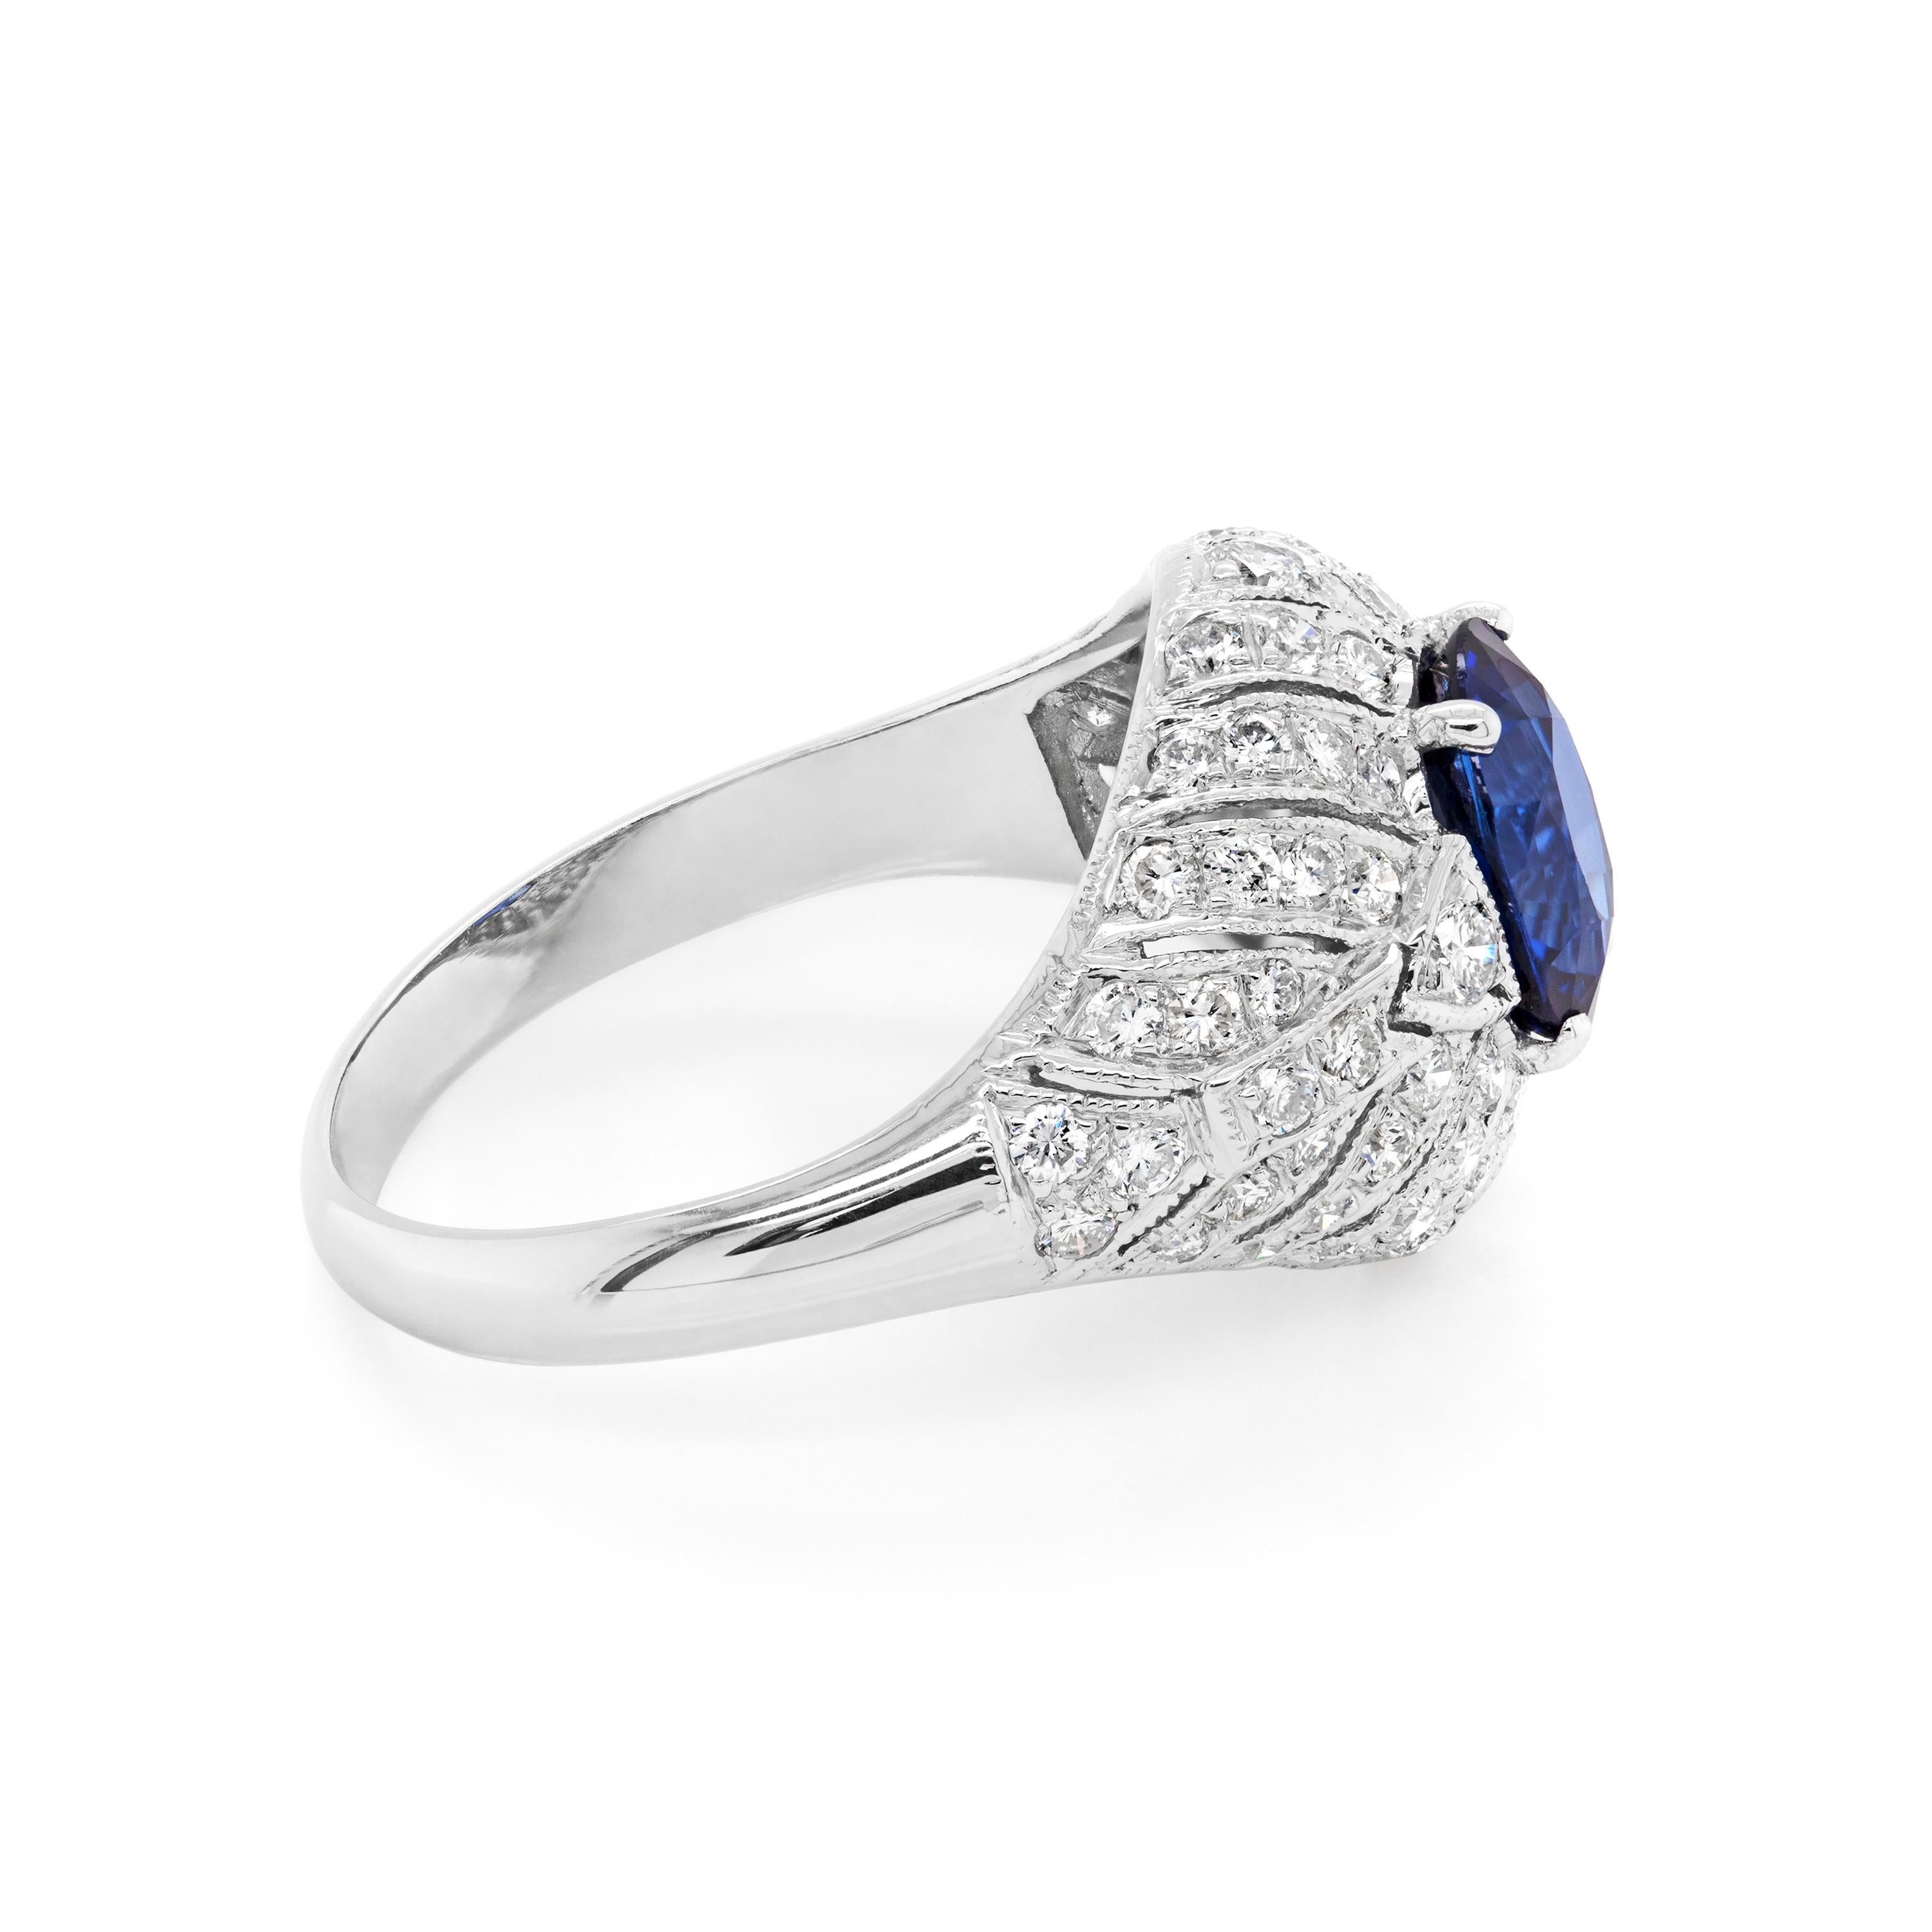 Beautiful 1950's engagement ring set with a royal blue natural sapphire in a 4 claw setting. The stone is mounted in the centre of an intricate Deco style bombé cluster, grain set with 72 round brilliant cut diamonds with an approximate total weight